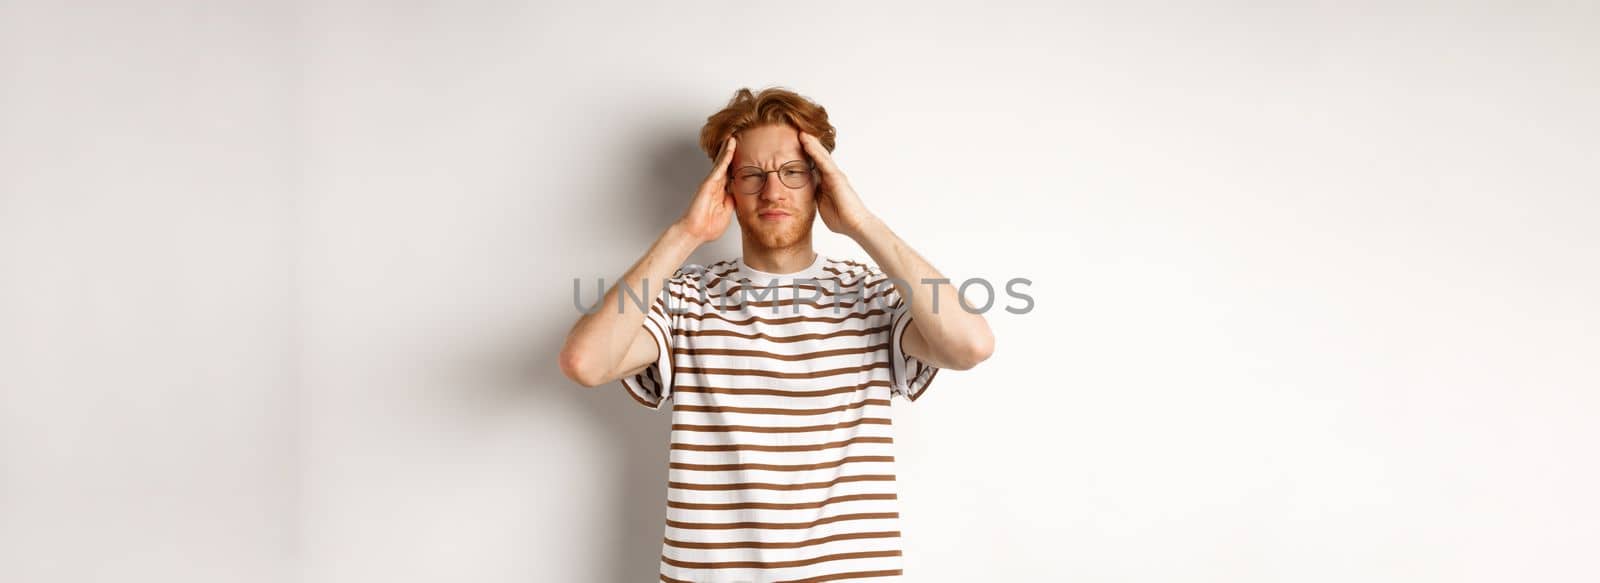 Image of young man with red hair and glasses touching head, frowning from painful migraine, having headache, standing over white background.